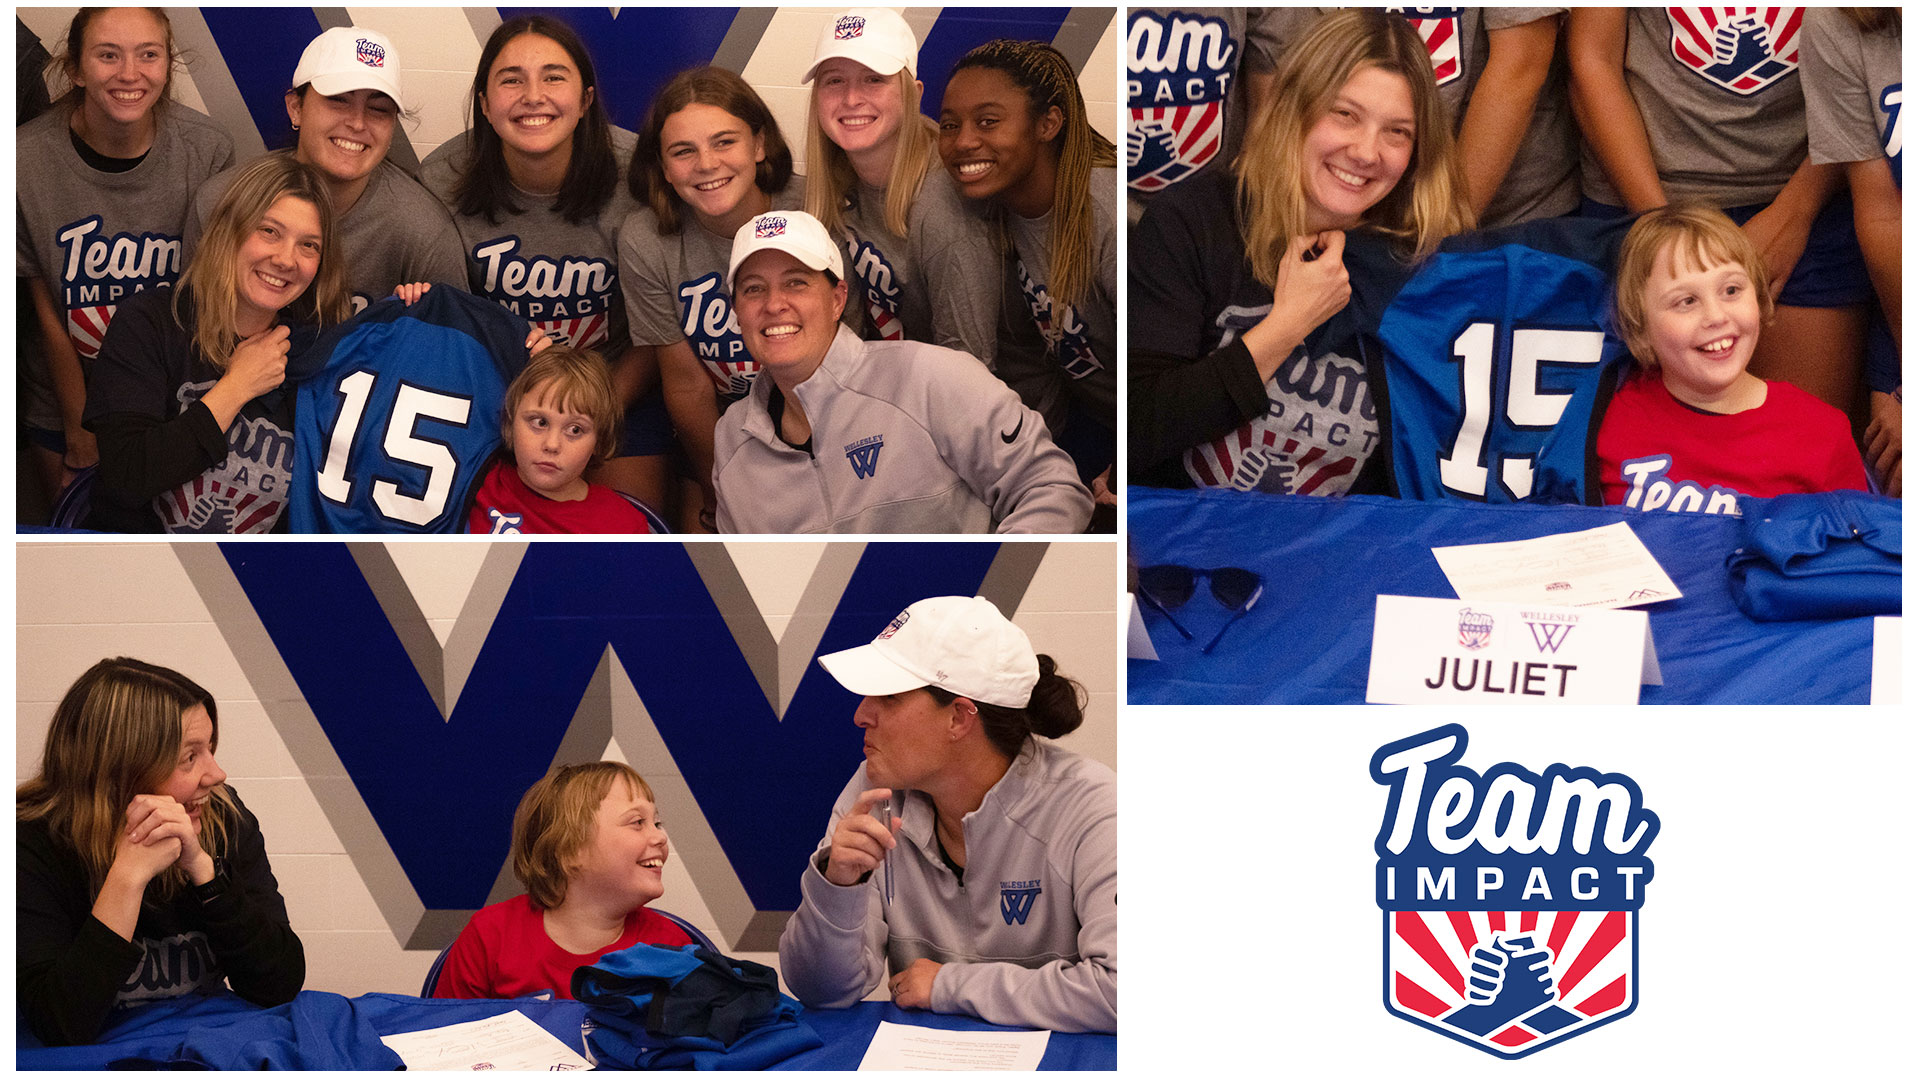 The Blue soccer team signed 9-year-old Juliet Sullivan through Team IMPACT on Tuesday (Bell Pitkin '23)